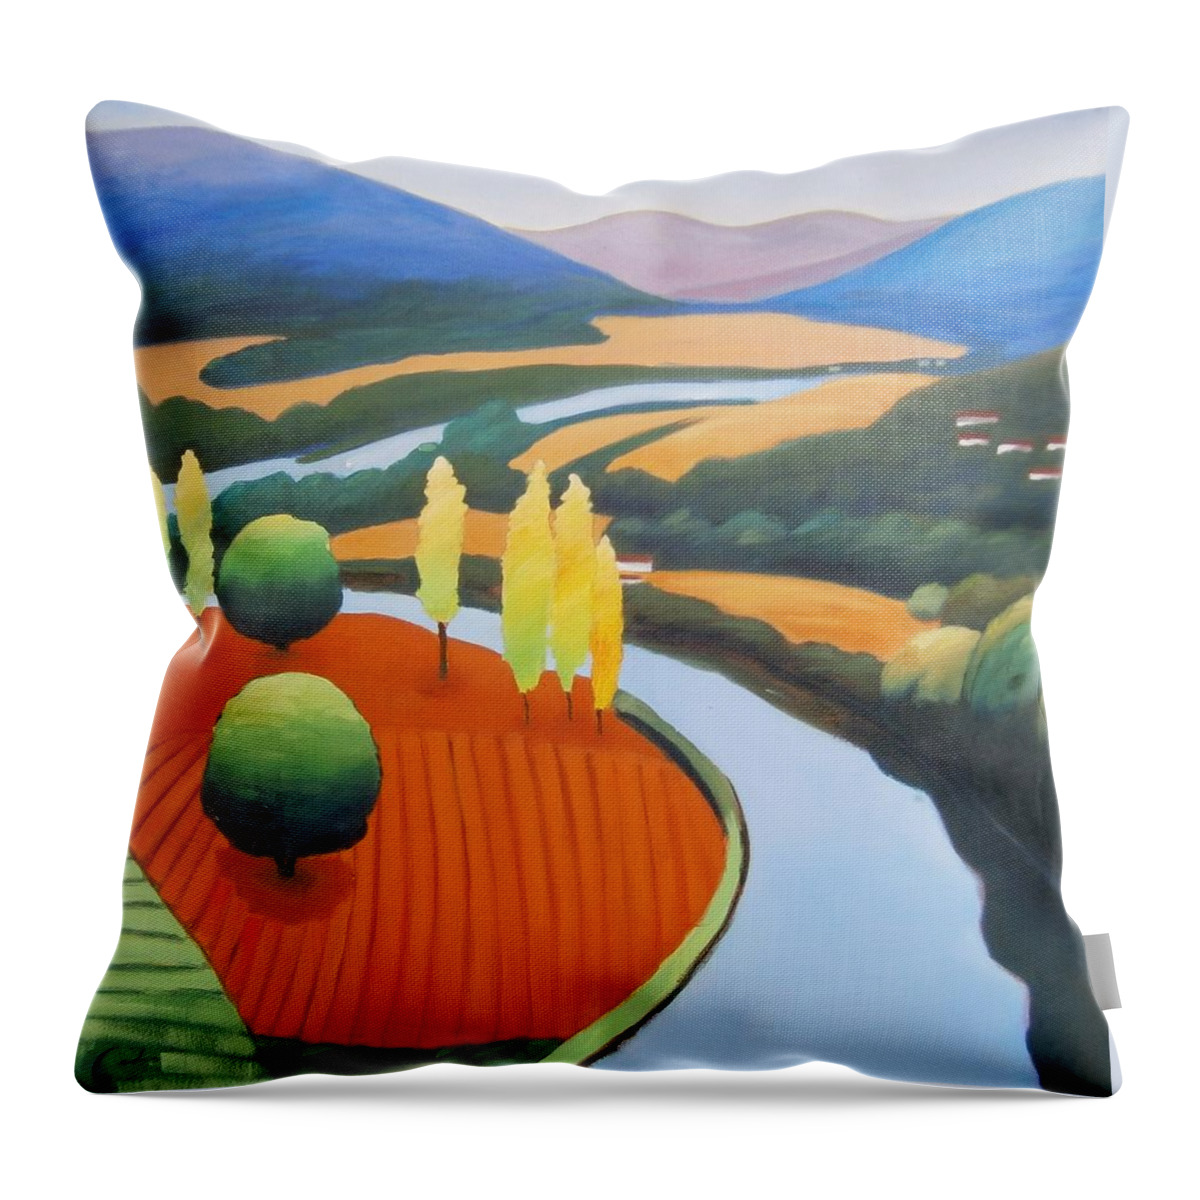 Lot River Throw Pillow featuring the painting Above the Lot Square by Gary Coleman